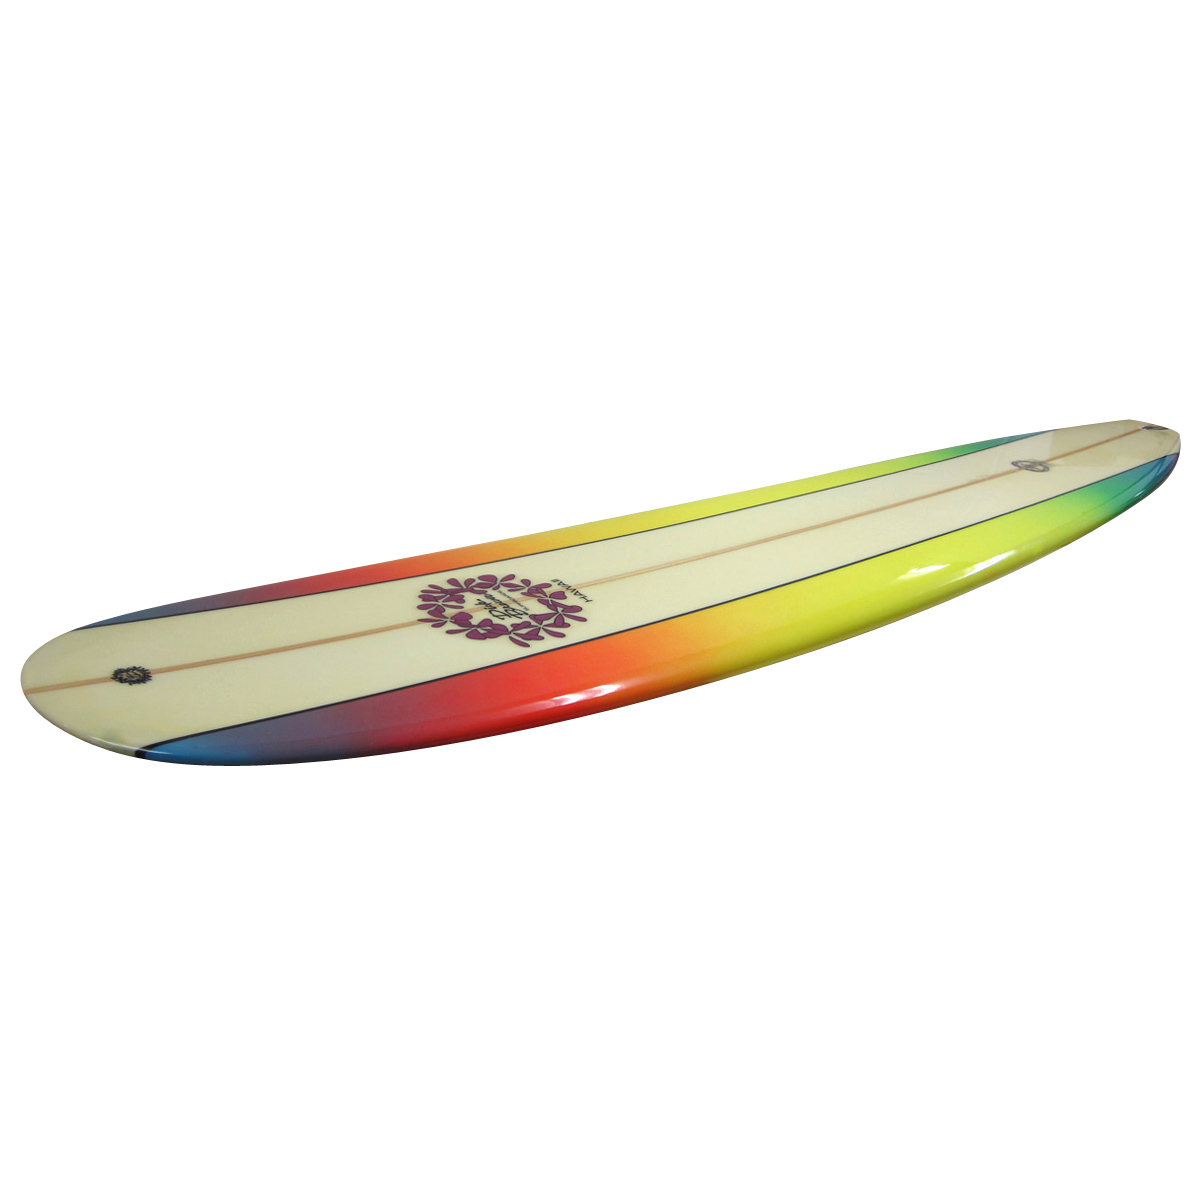 Dick Brewer / 10`0 Classic Lightweight Shaped By Dick Brewer 